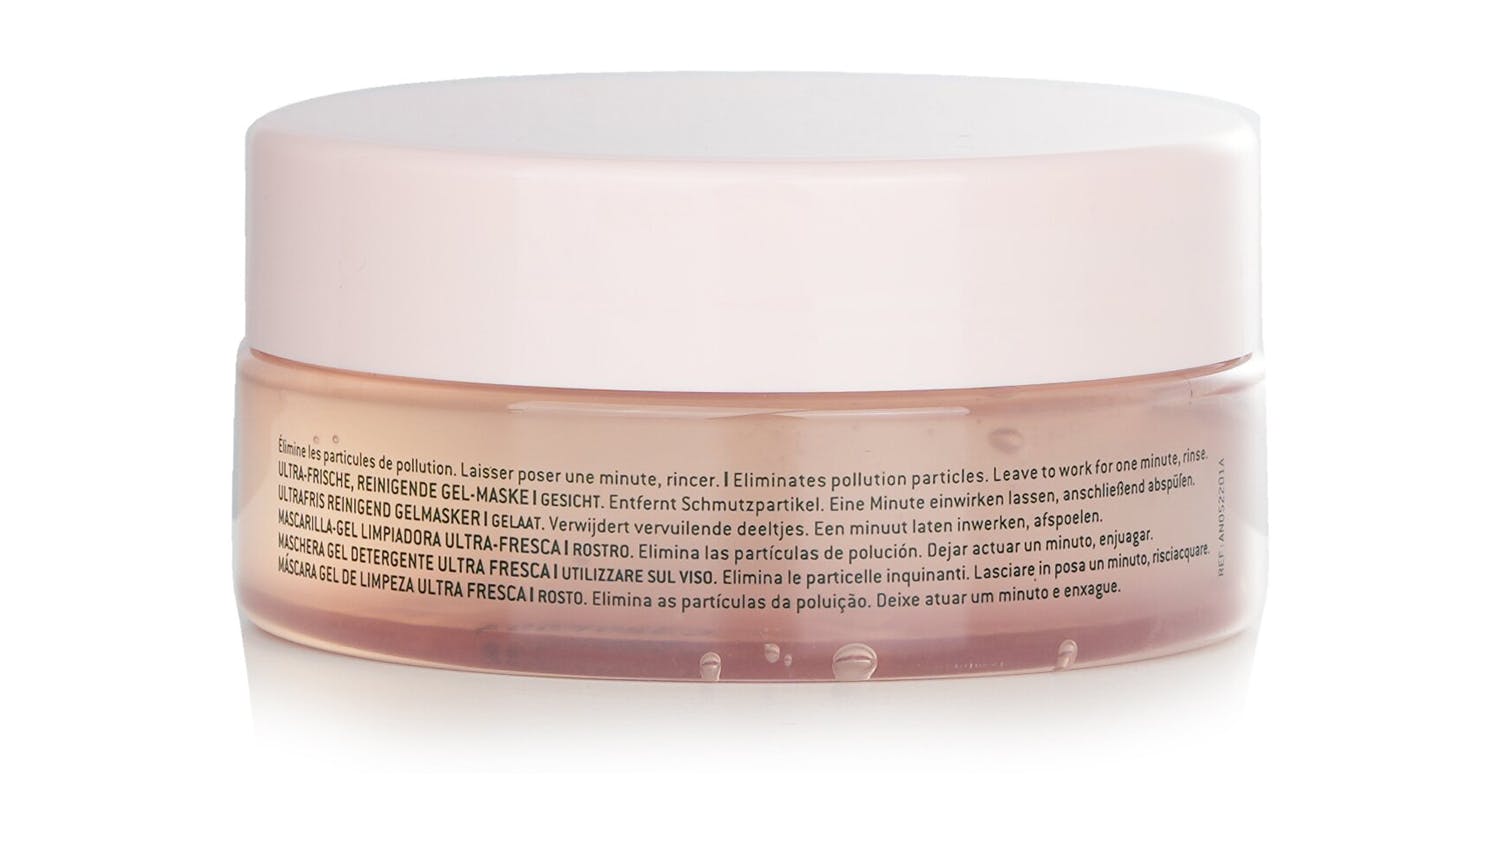 Nuxe Very Rose Ultra-Fresh Cleansing Gel Mask - 150ml/5.1oz